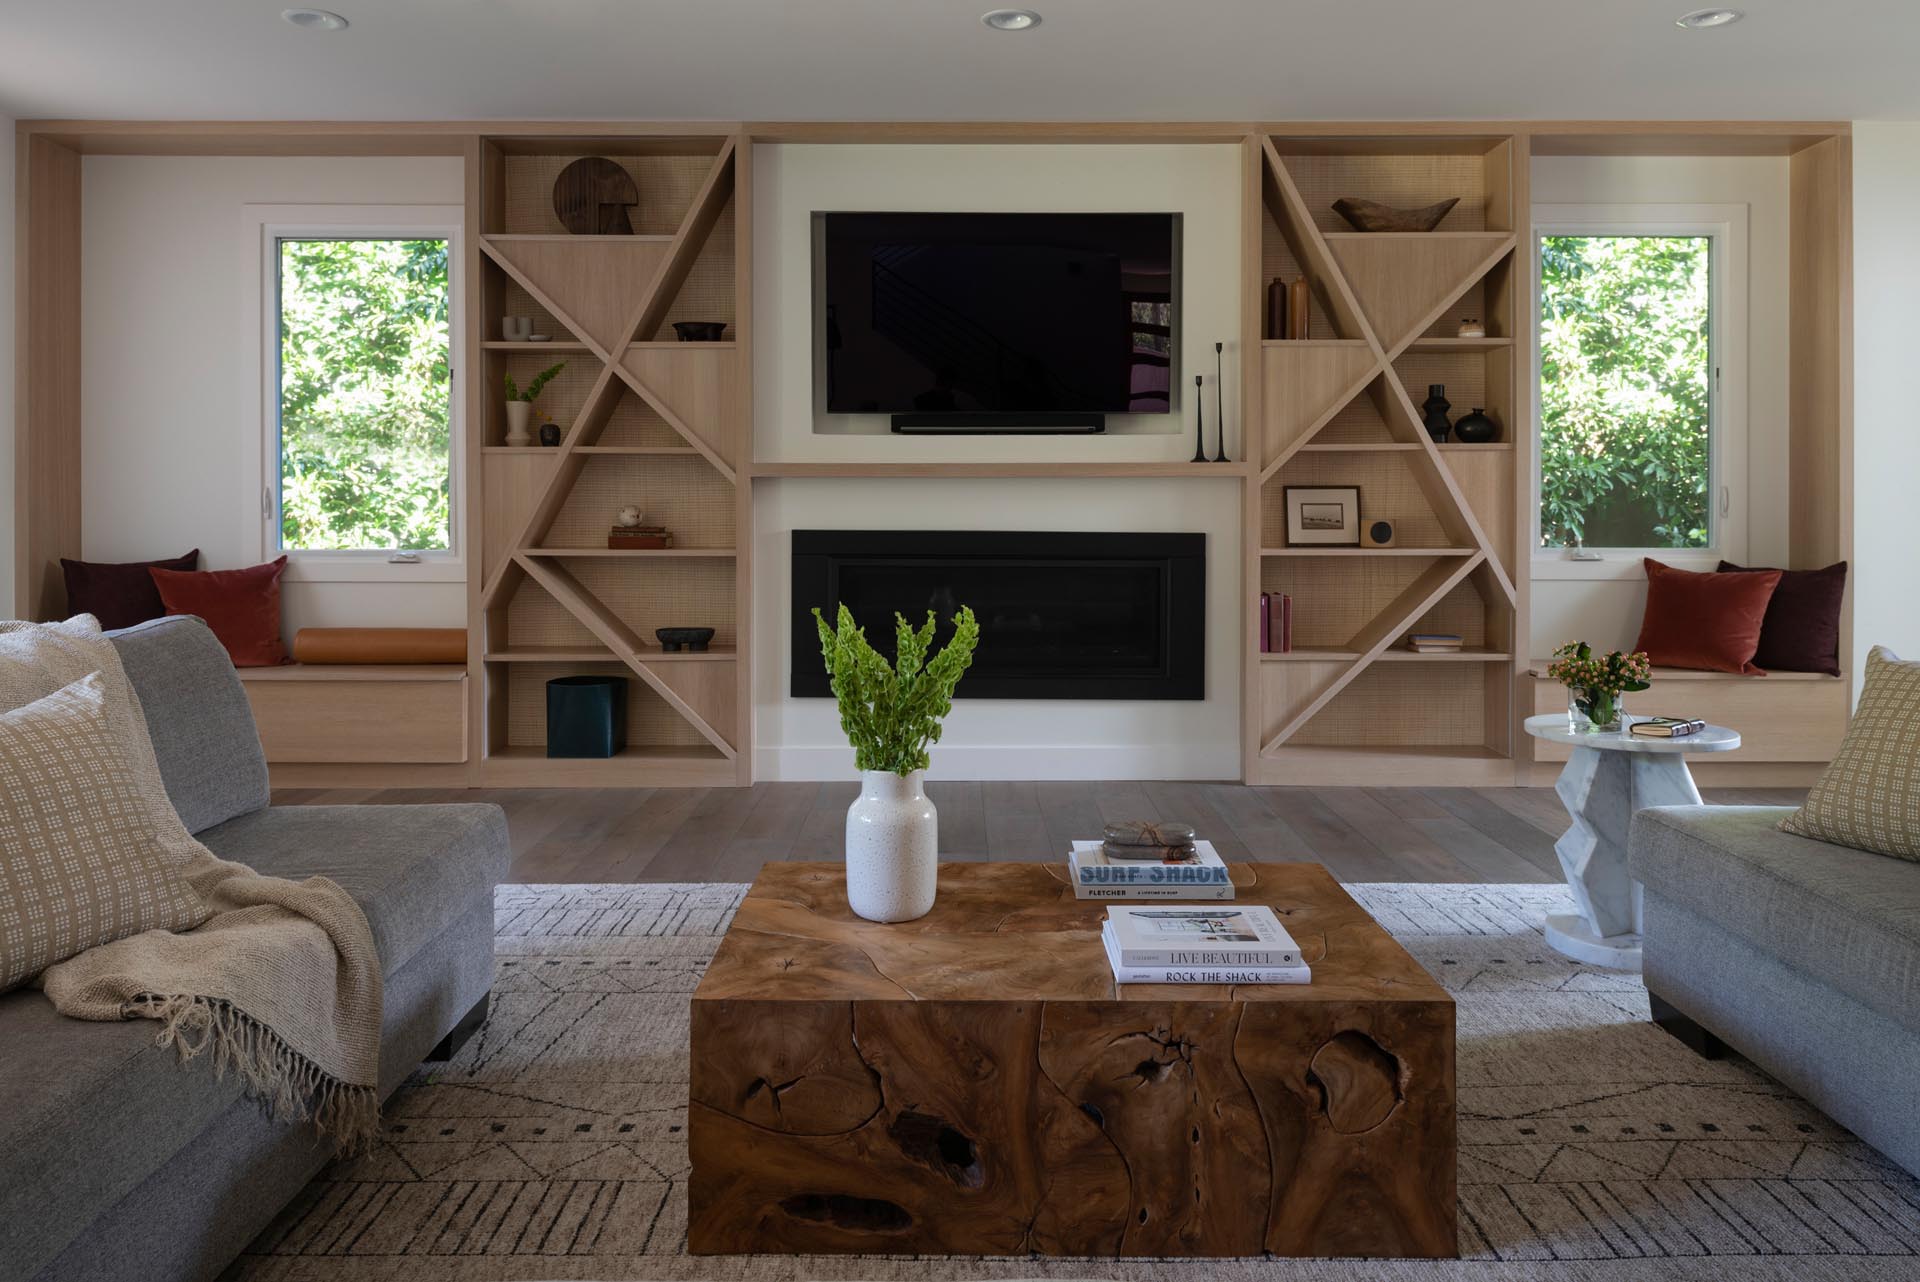 A modern living room with a custom designed wall that includes a recessed TV, a fireplace, wood shelving, and a pair of window seats.